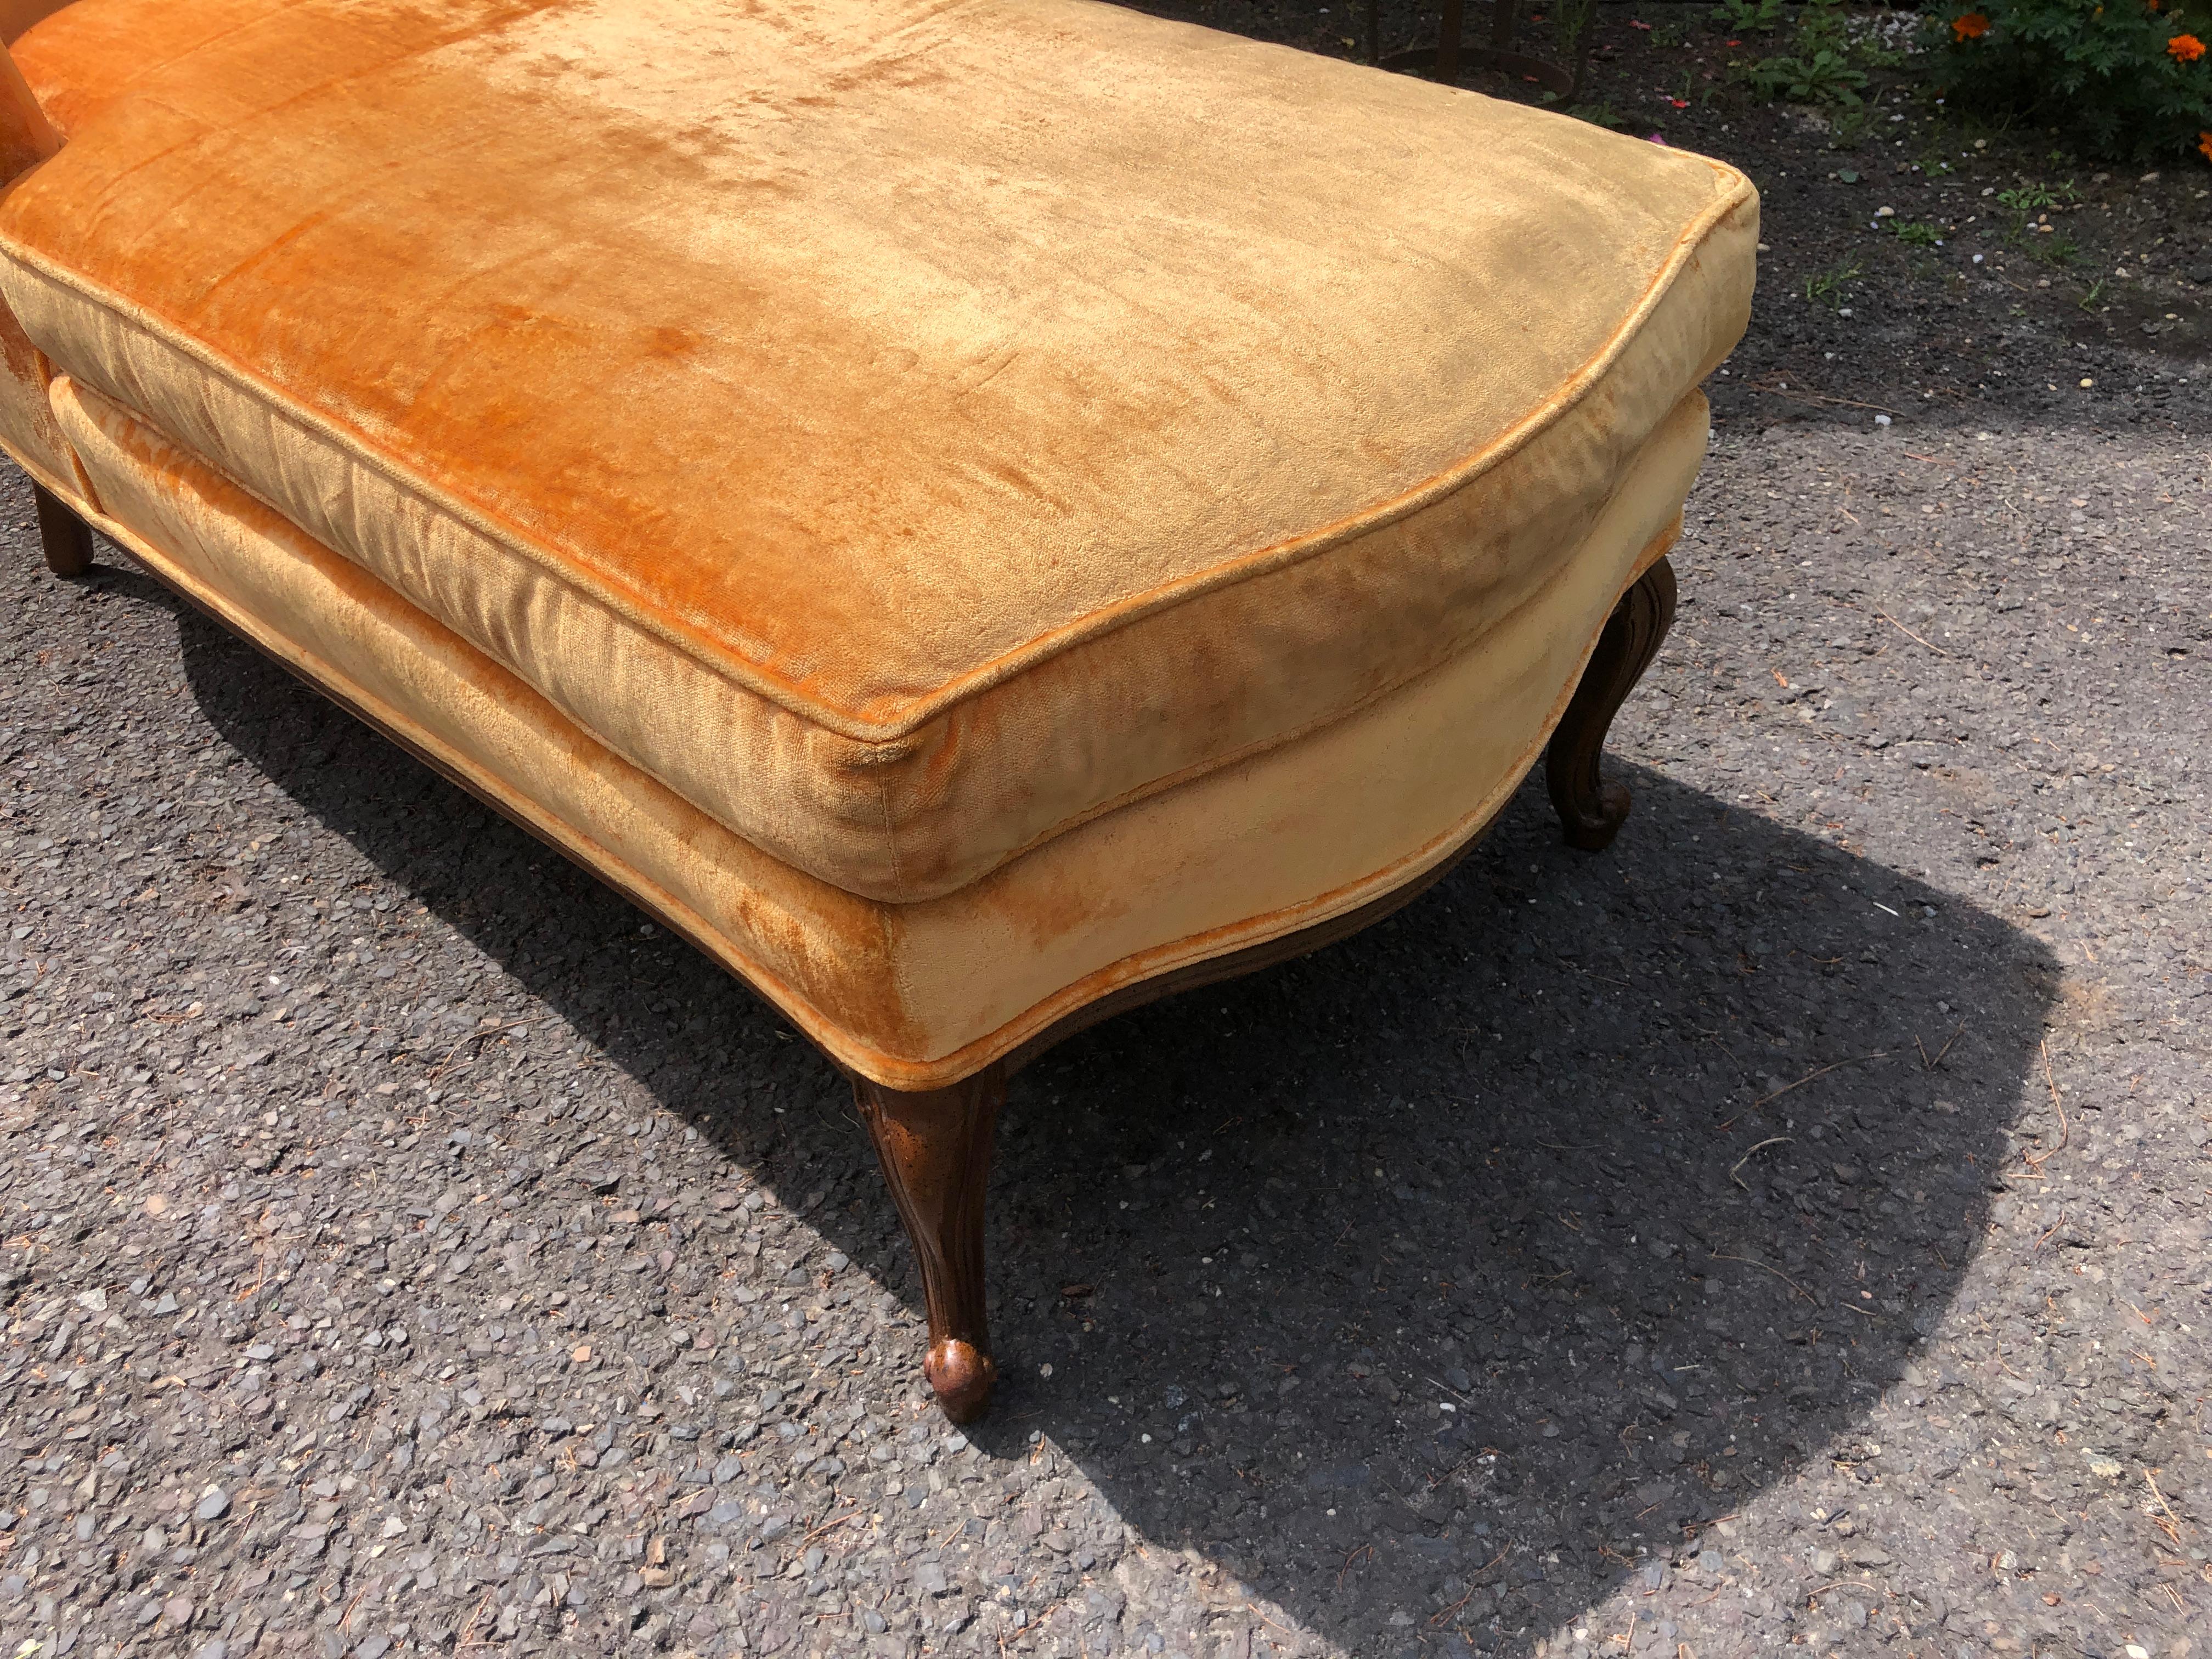 Sensational Petite French Provincial Chaise Lounge Mid-Century  For Sale 7